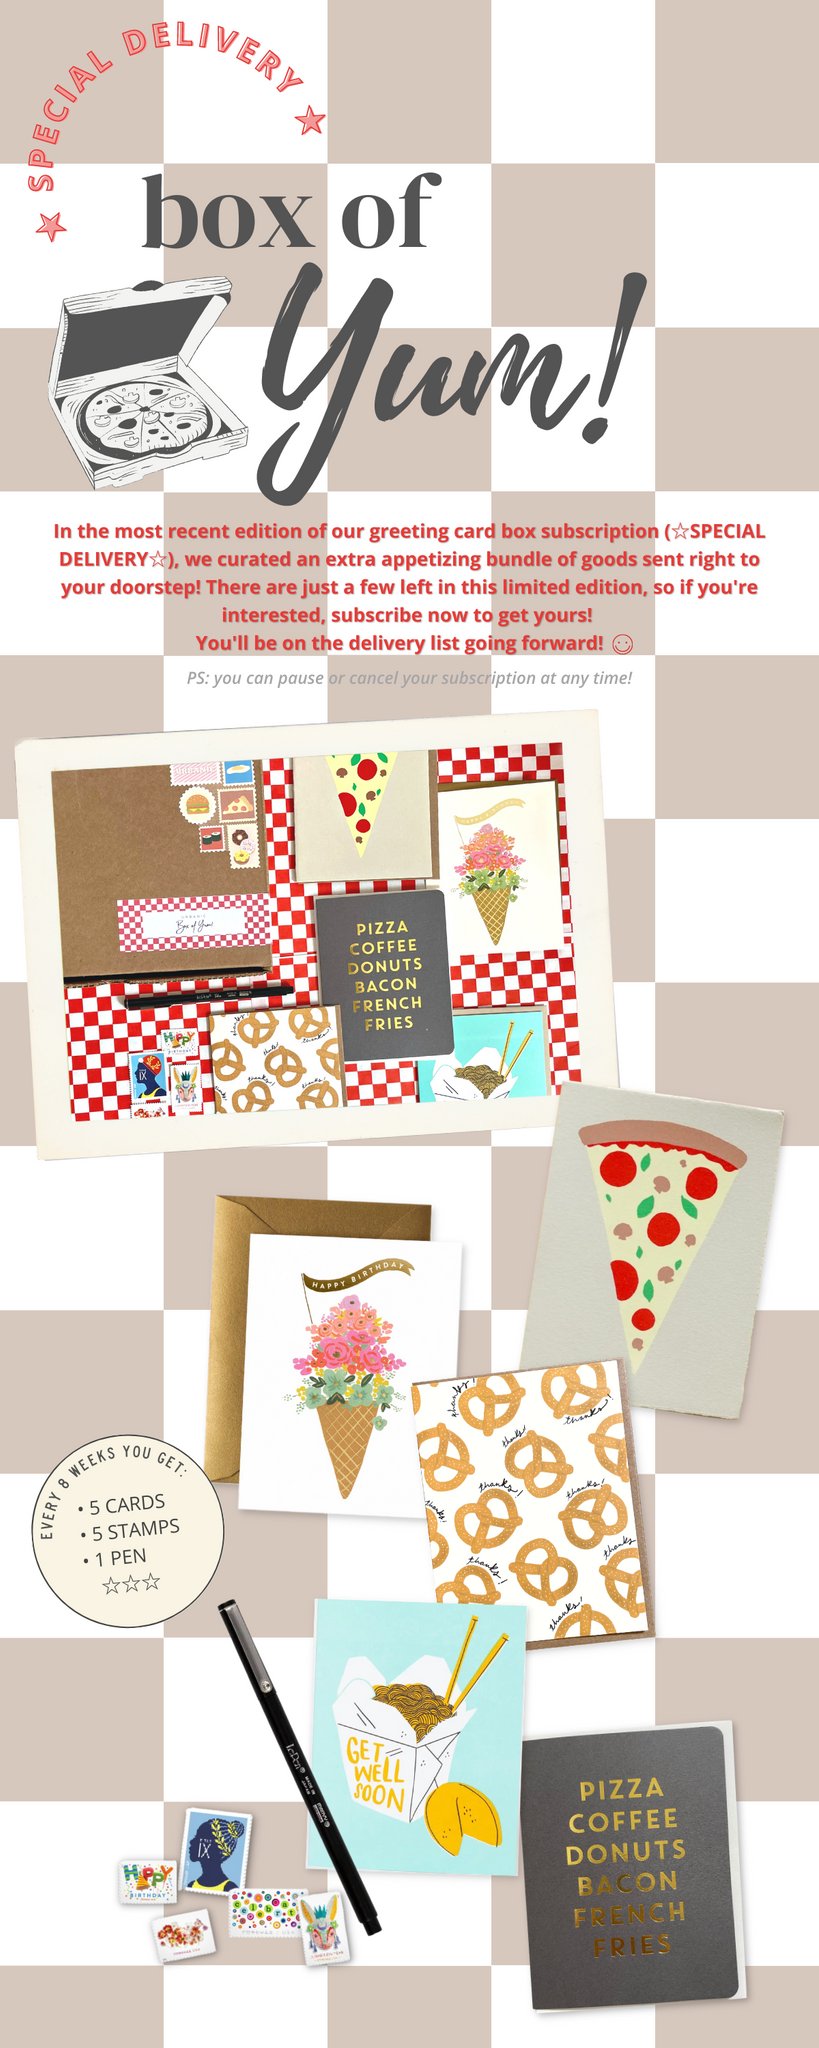 urbanic paper boutique los angeles california gifts stationery special delivery subscription box loot box hamburger frieds pizza ice cream cone pretzle noodles take out